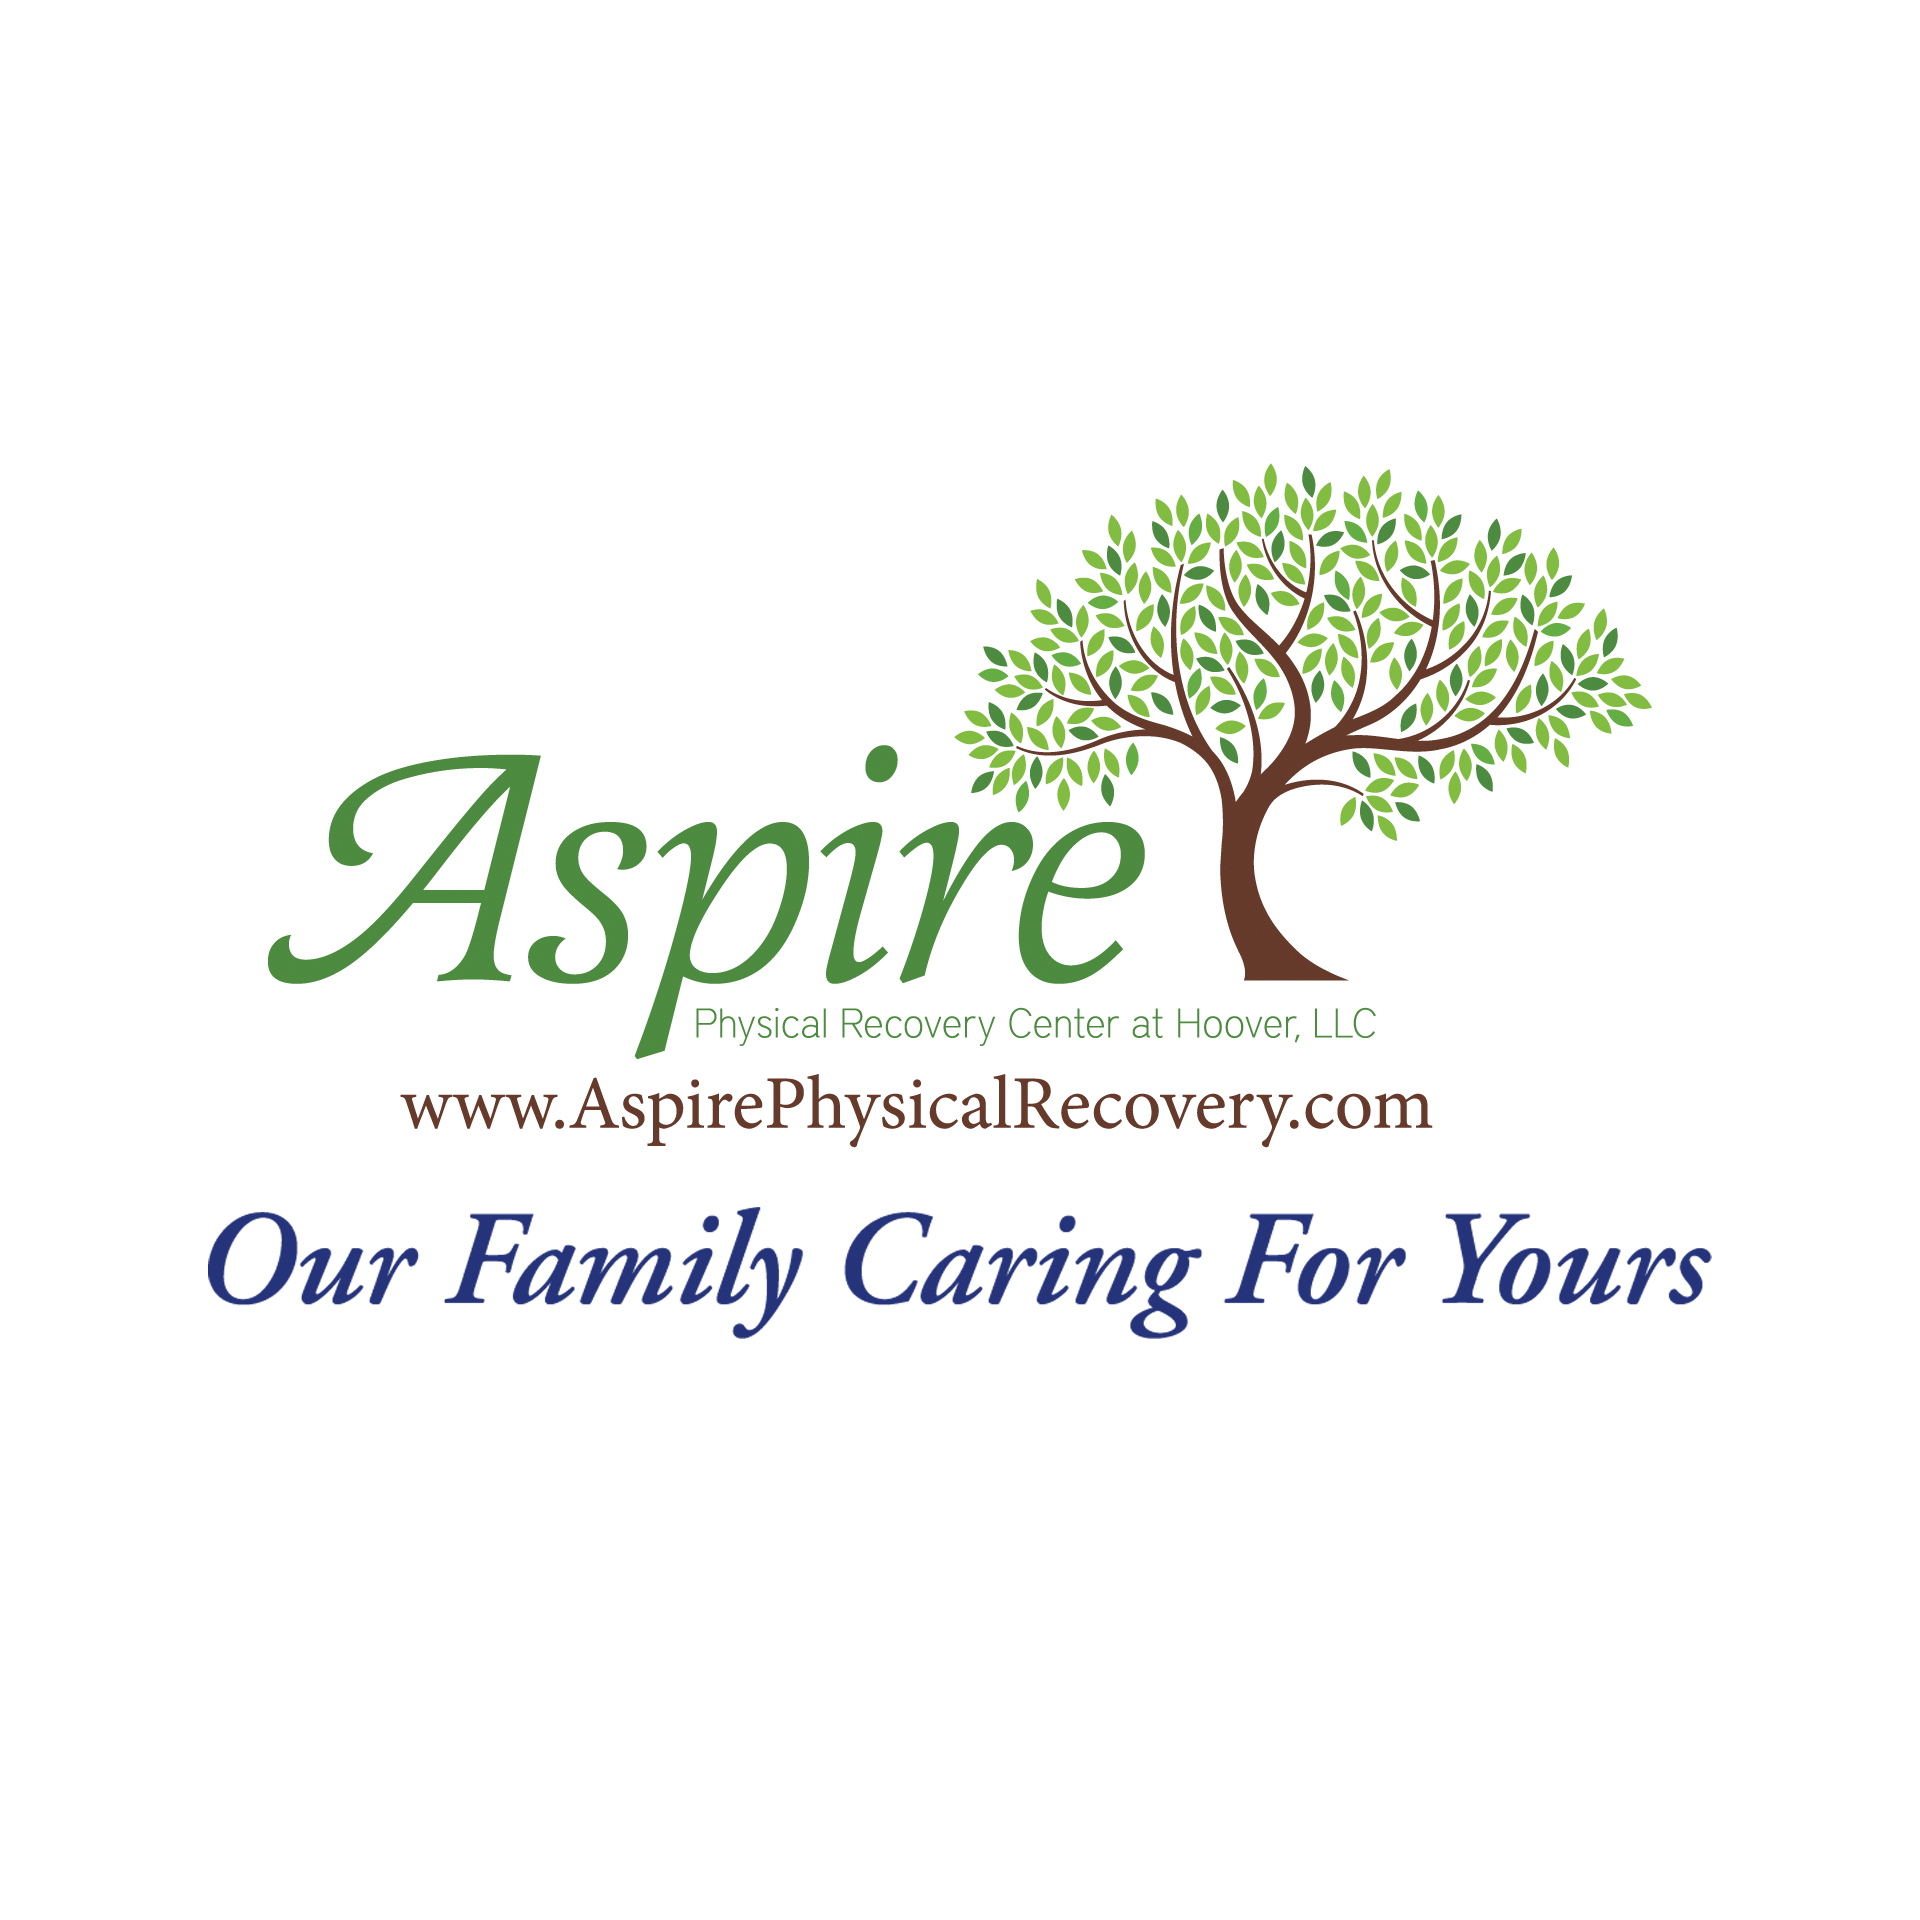 Aspire Physical Recovery Center at Hoover, LLC